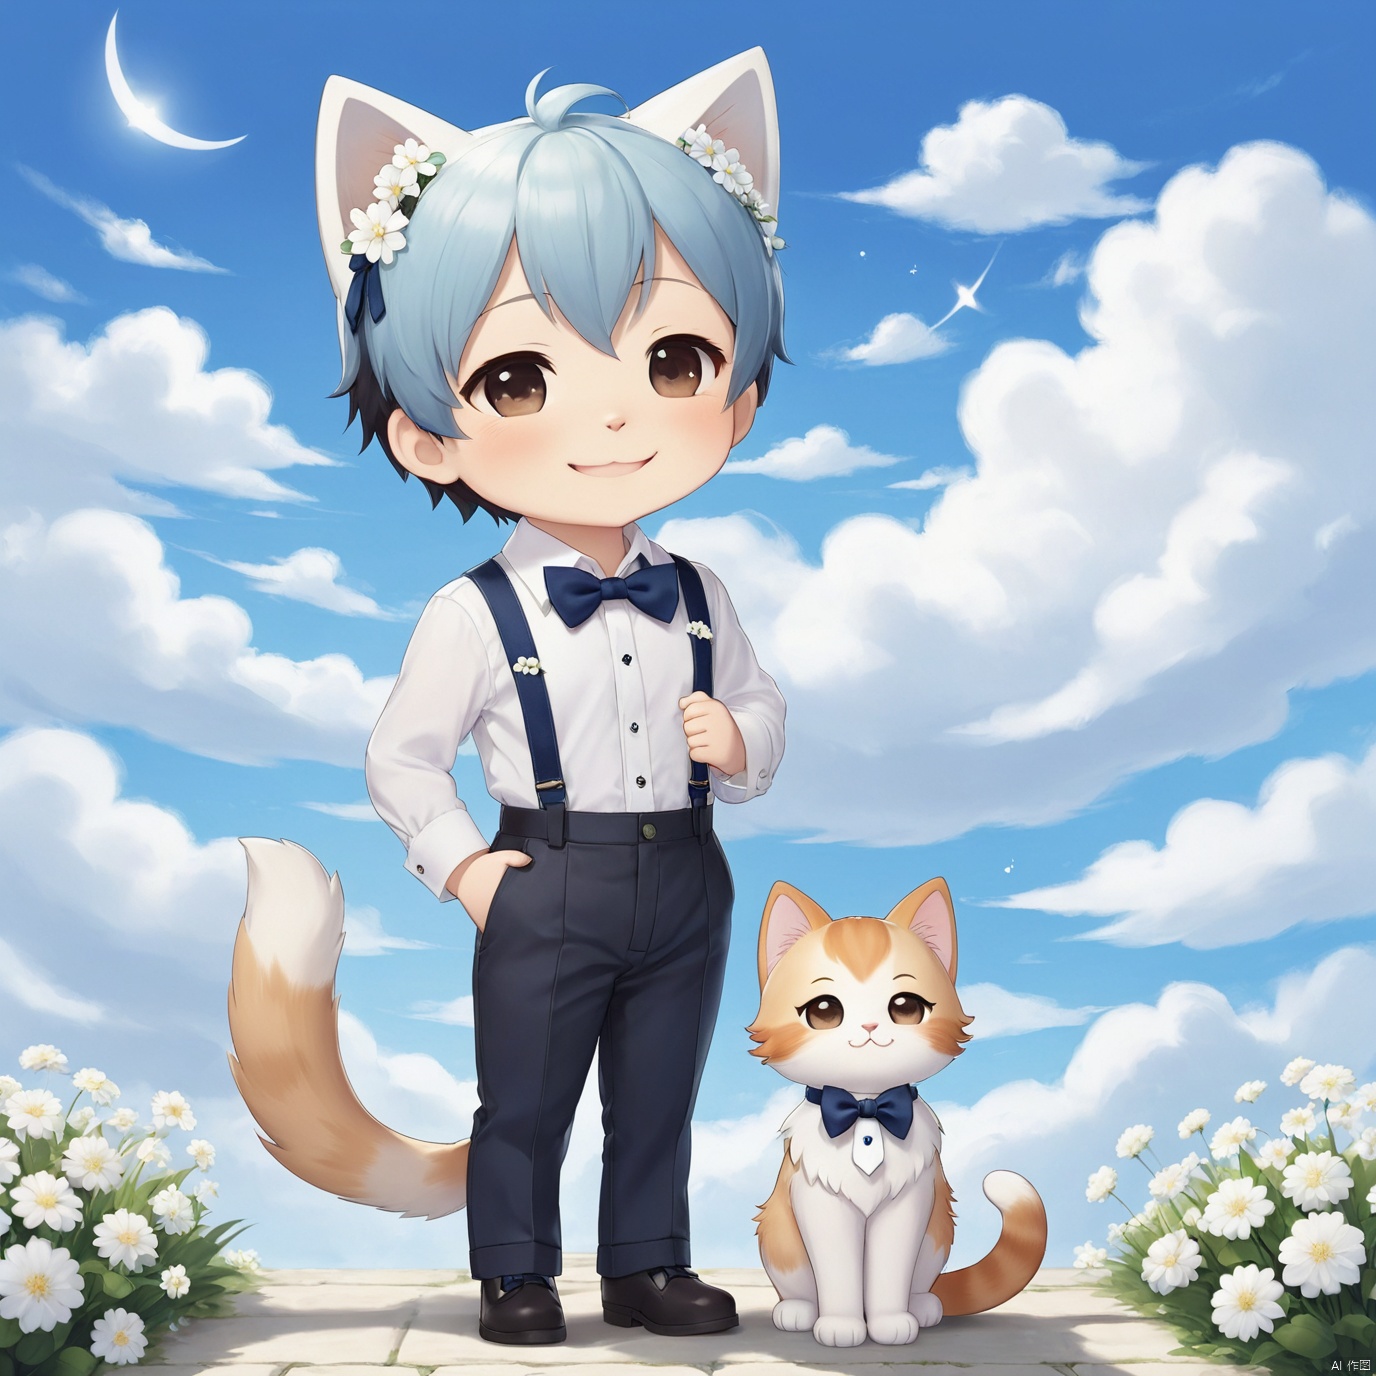 masterpiece, 1 boy, chibi, solo, full body, Spirit, Smile, Outdoor, Light blue sky, Clouds, White flower, Cat ear, tail, Shirt, Bow tie, textured skin, super detail, best quality,